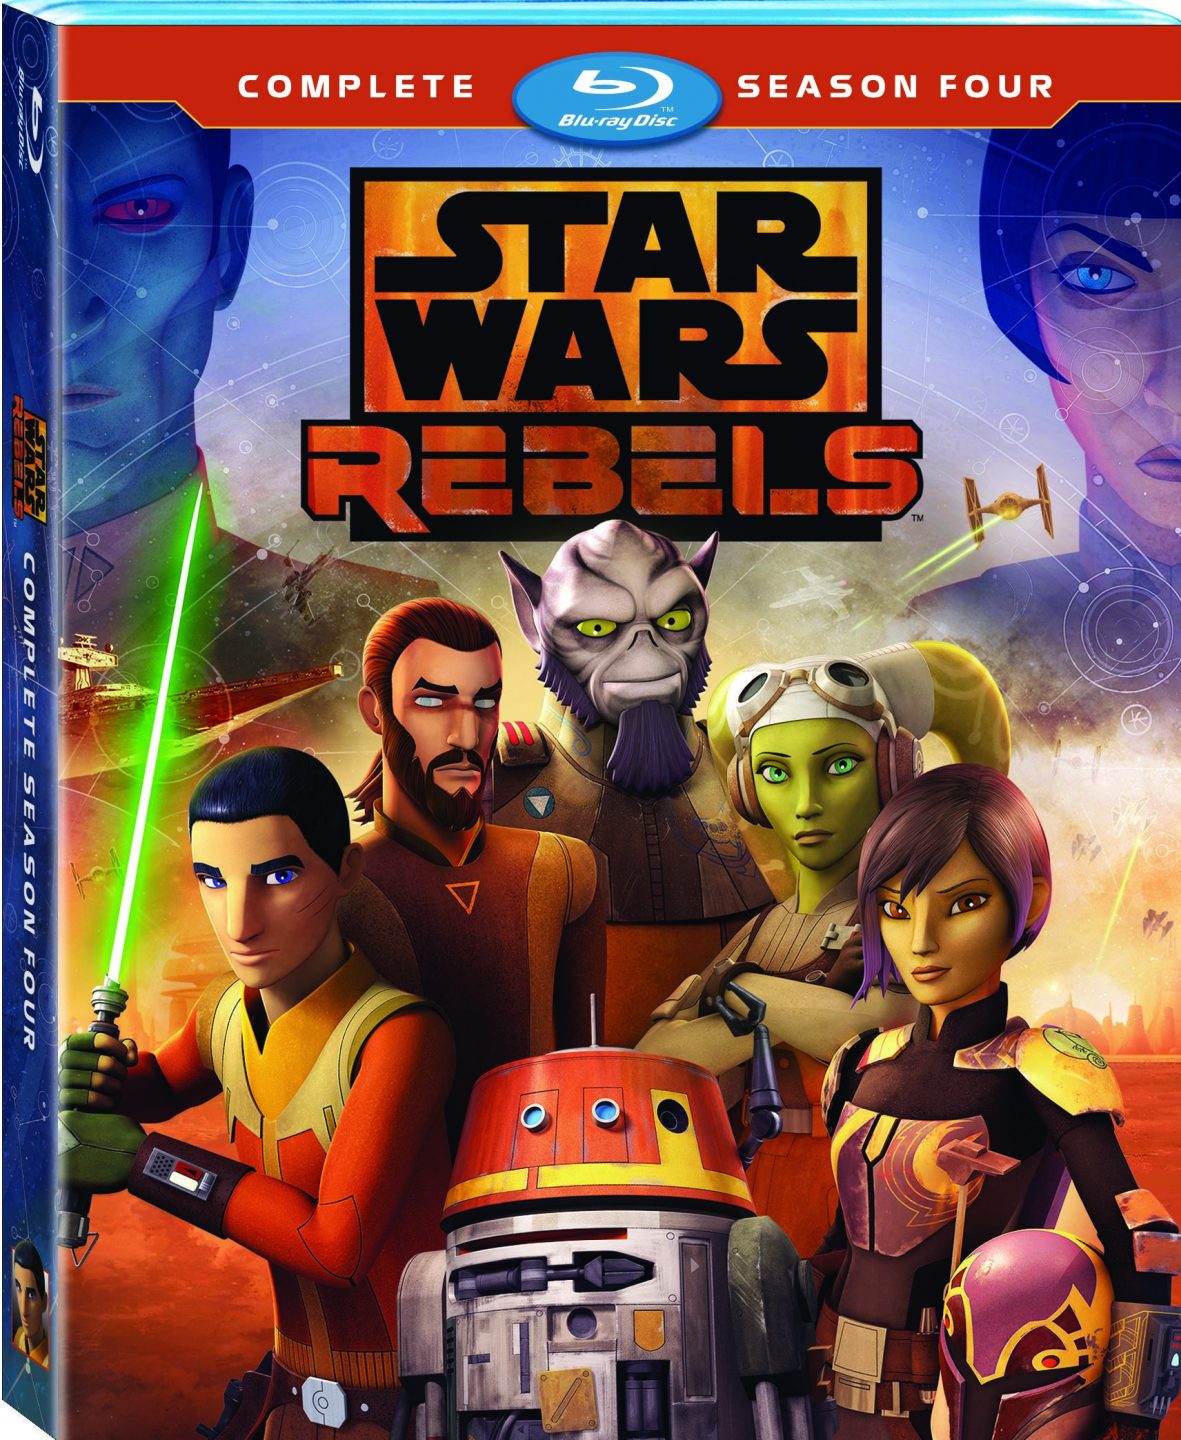 Star Wars Rebels: The Complete Fourth Season Blu-Ray Combo Pack cover (Lucasfilm/Walt Disney Studios Home Entertainment)